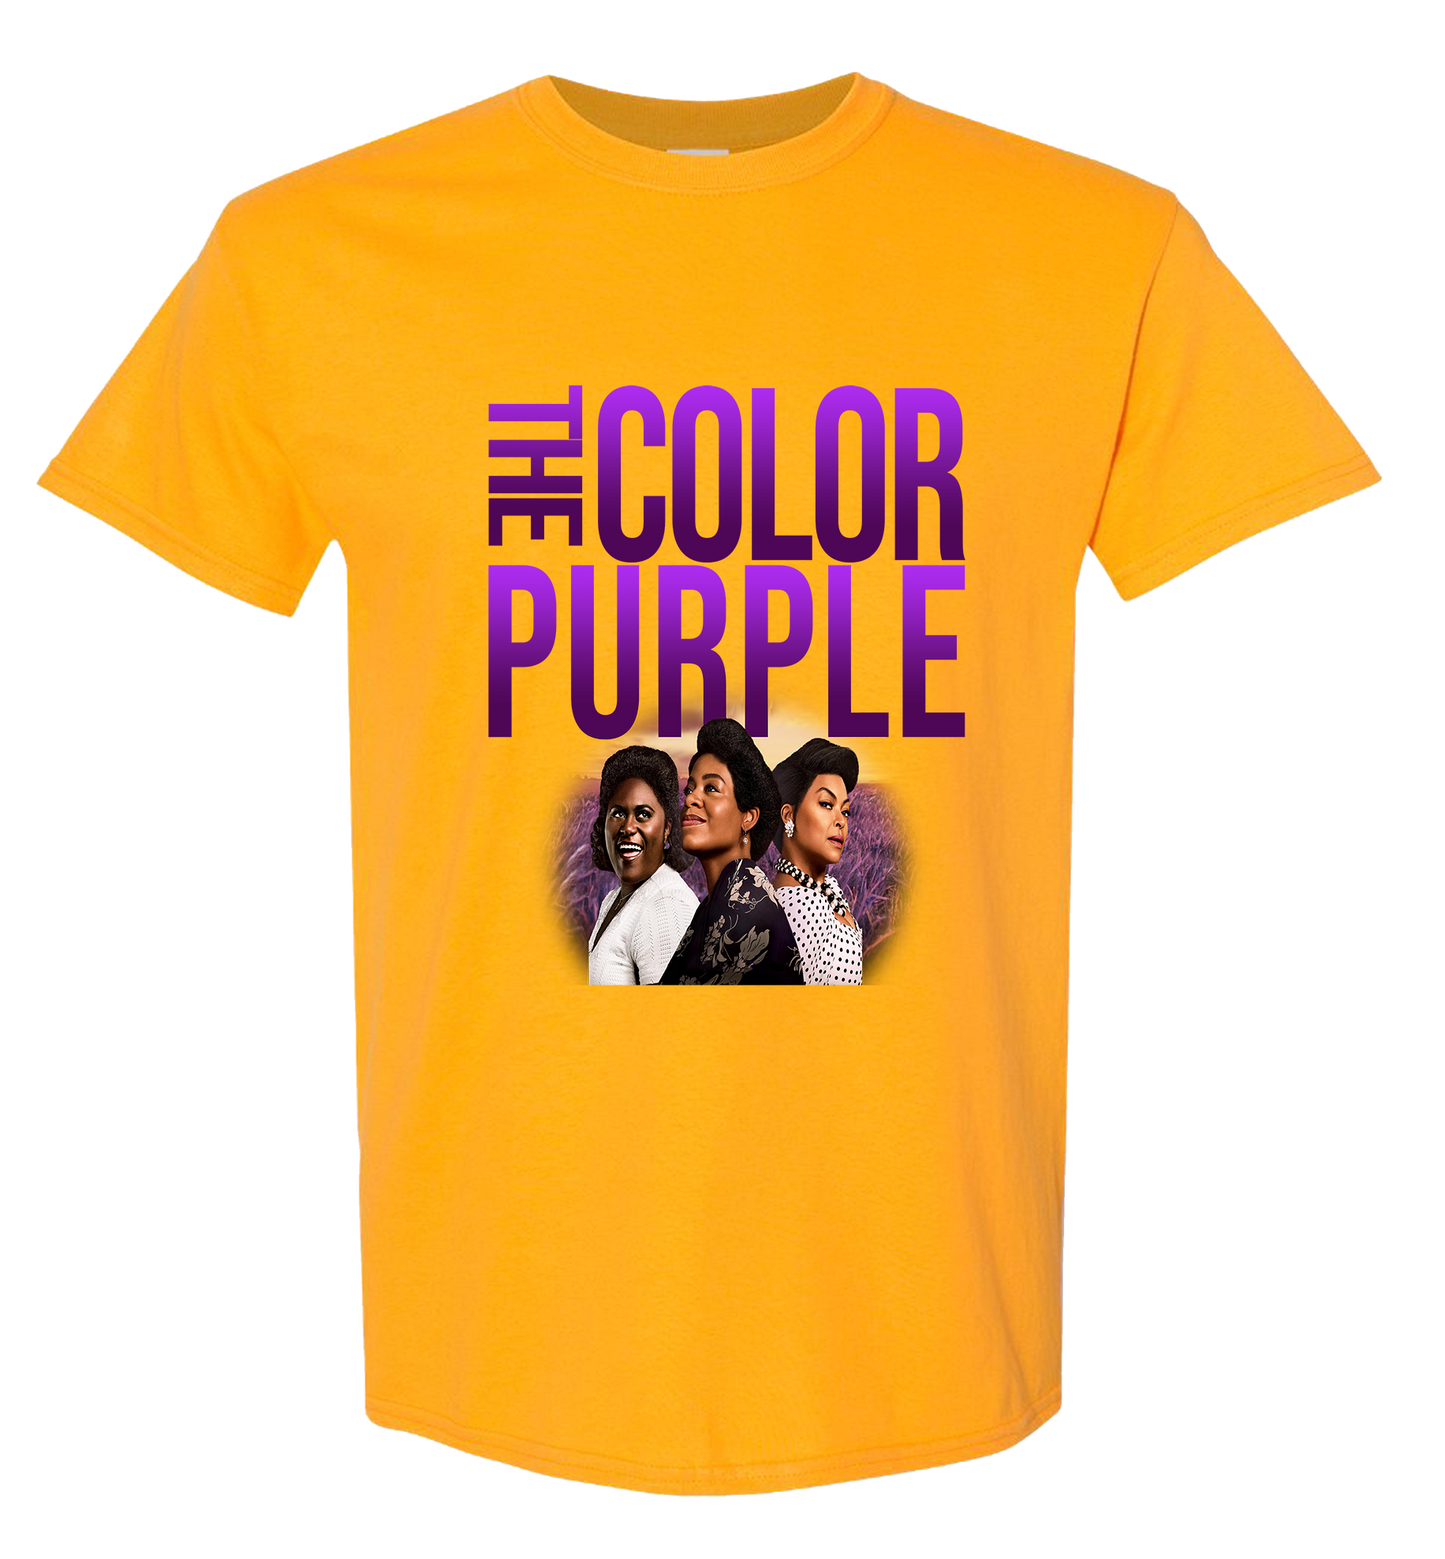 CLEARANCE - The Color Purple T-Shirt - Short sleeve)